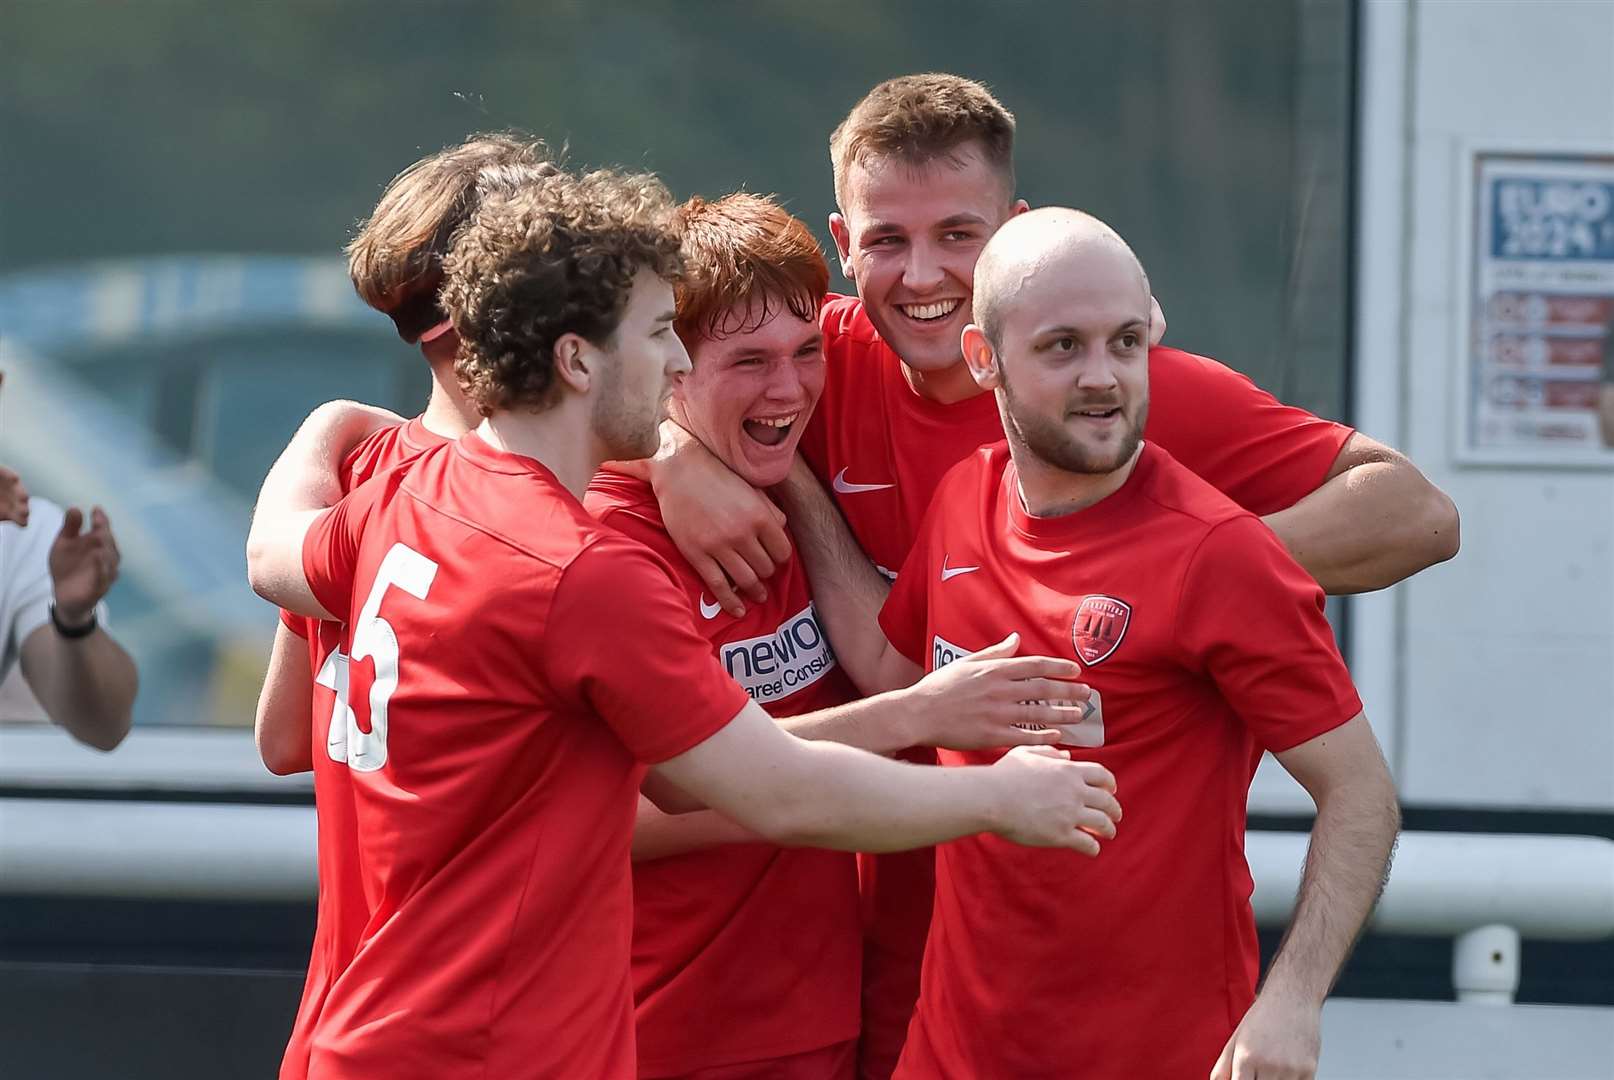 Adam Larkin (centre) scored a hat-trick for Tunbridge Wells Foresters Picture: PSP Images